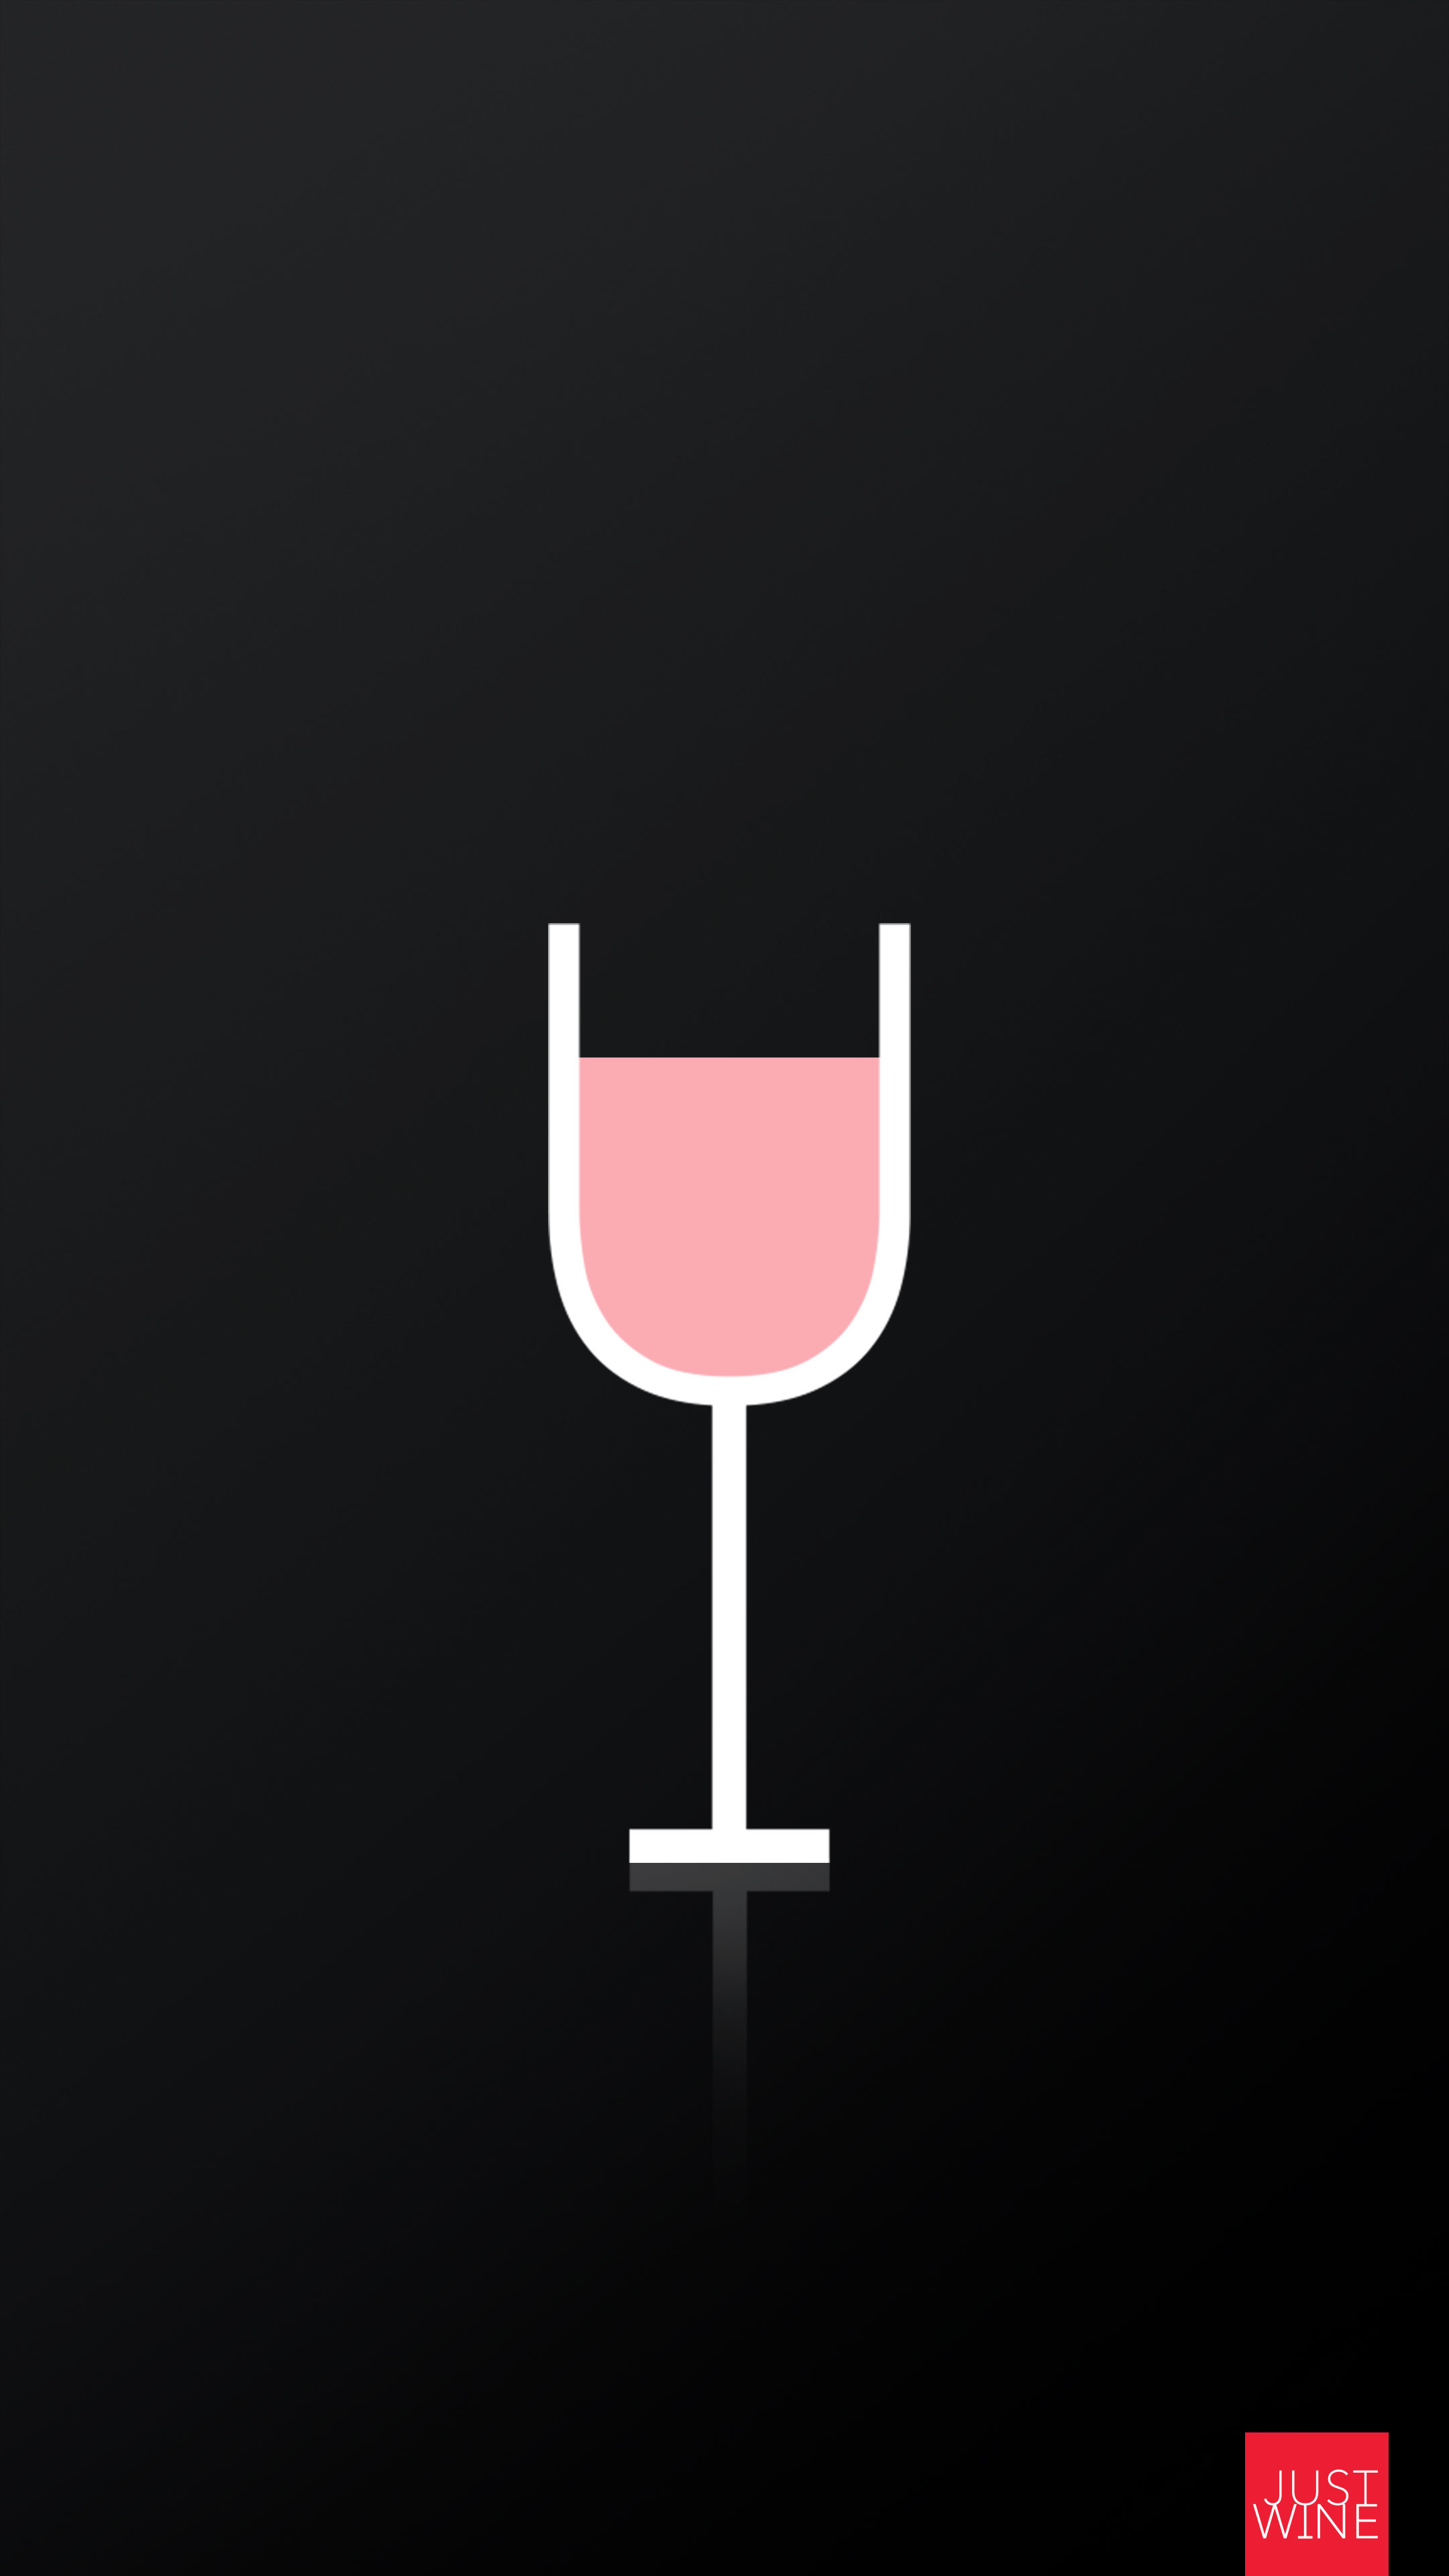 2160x3840 ... just-wine-mobile-wallpaper-background-iphone-rose ...